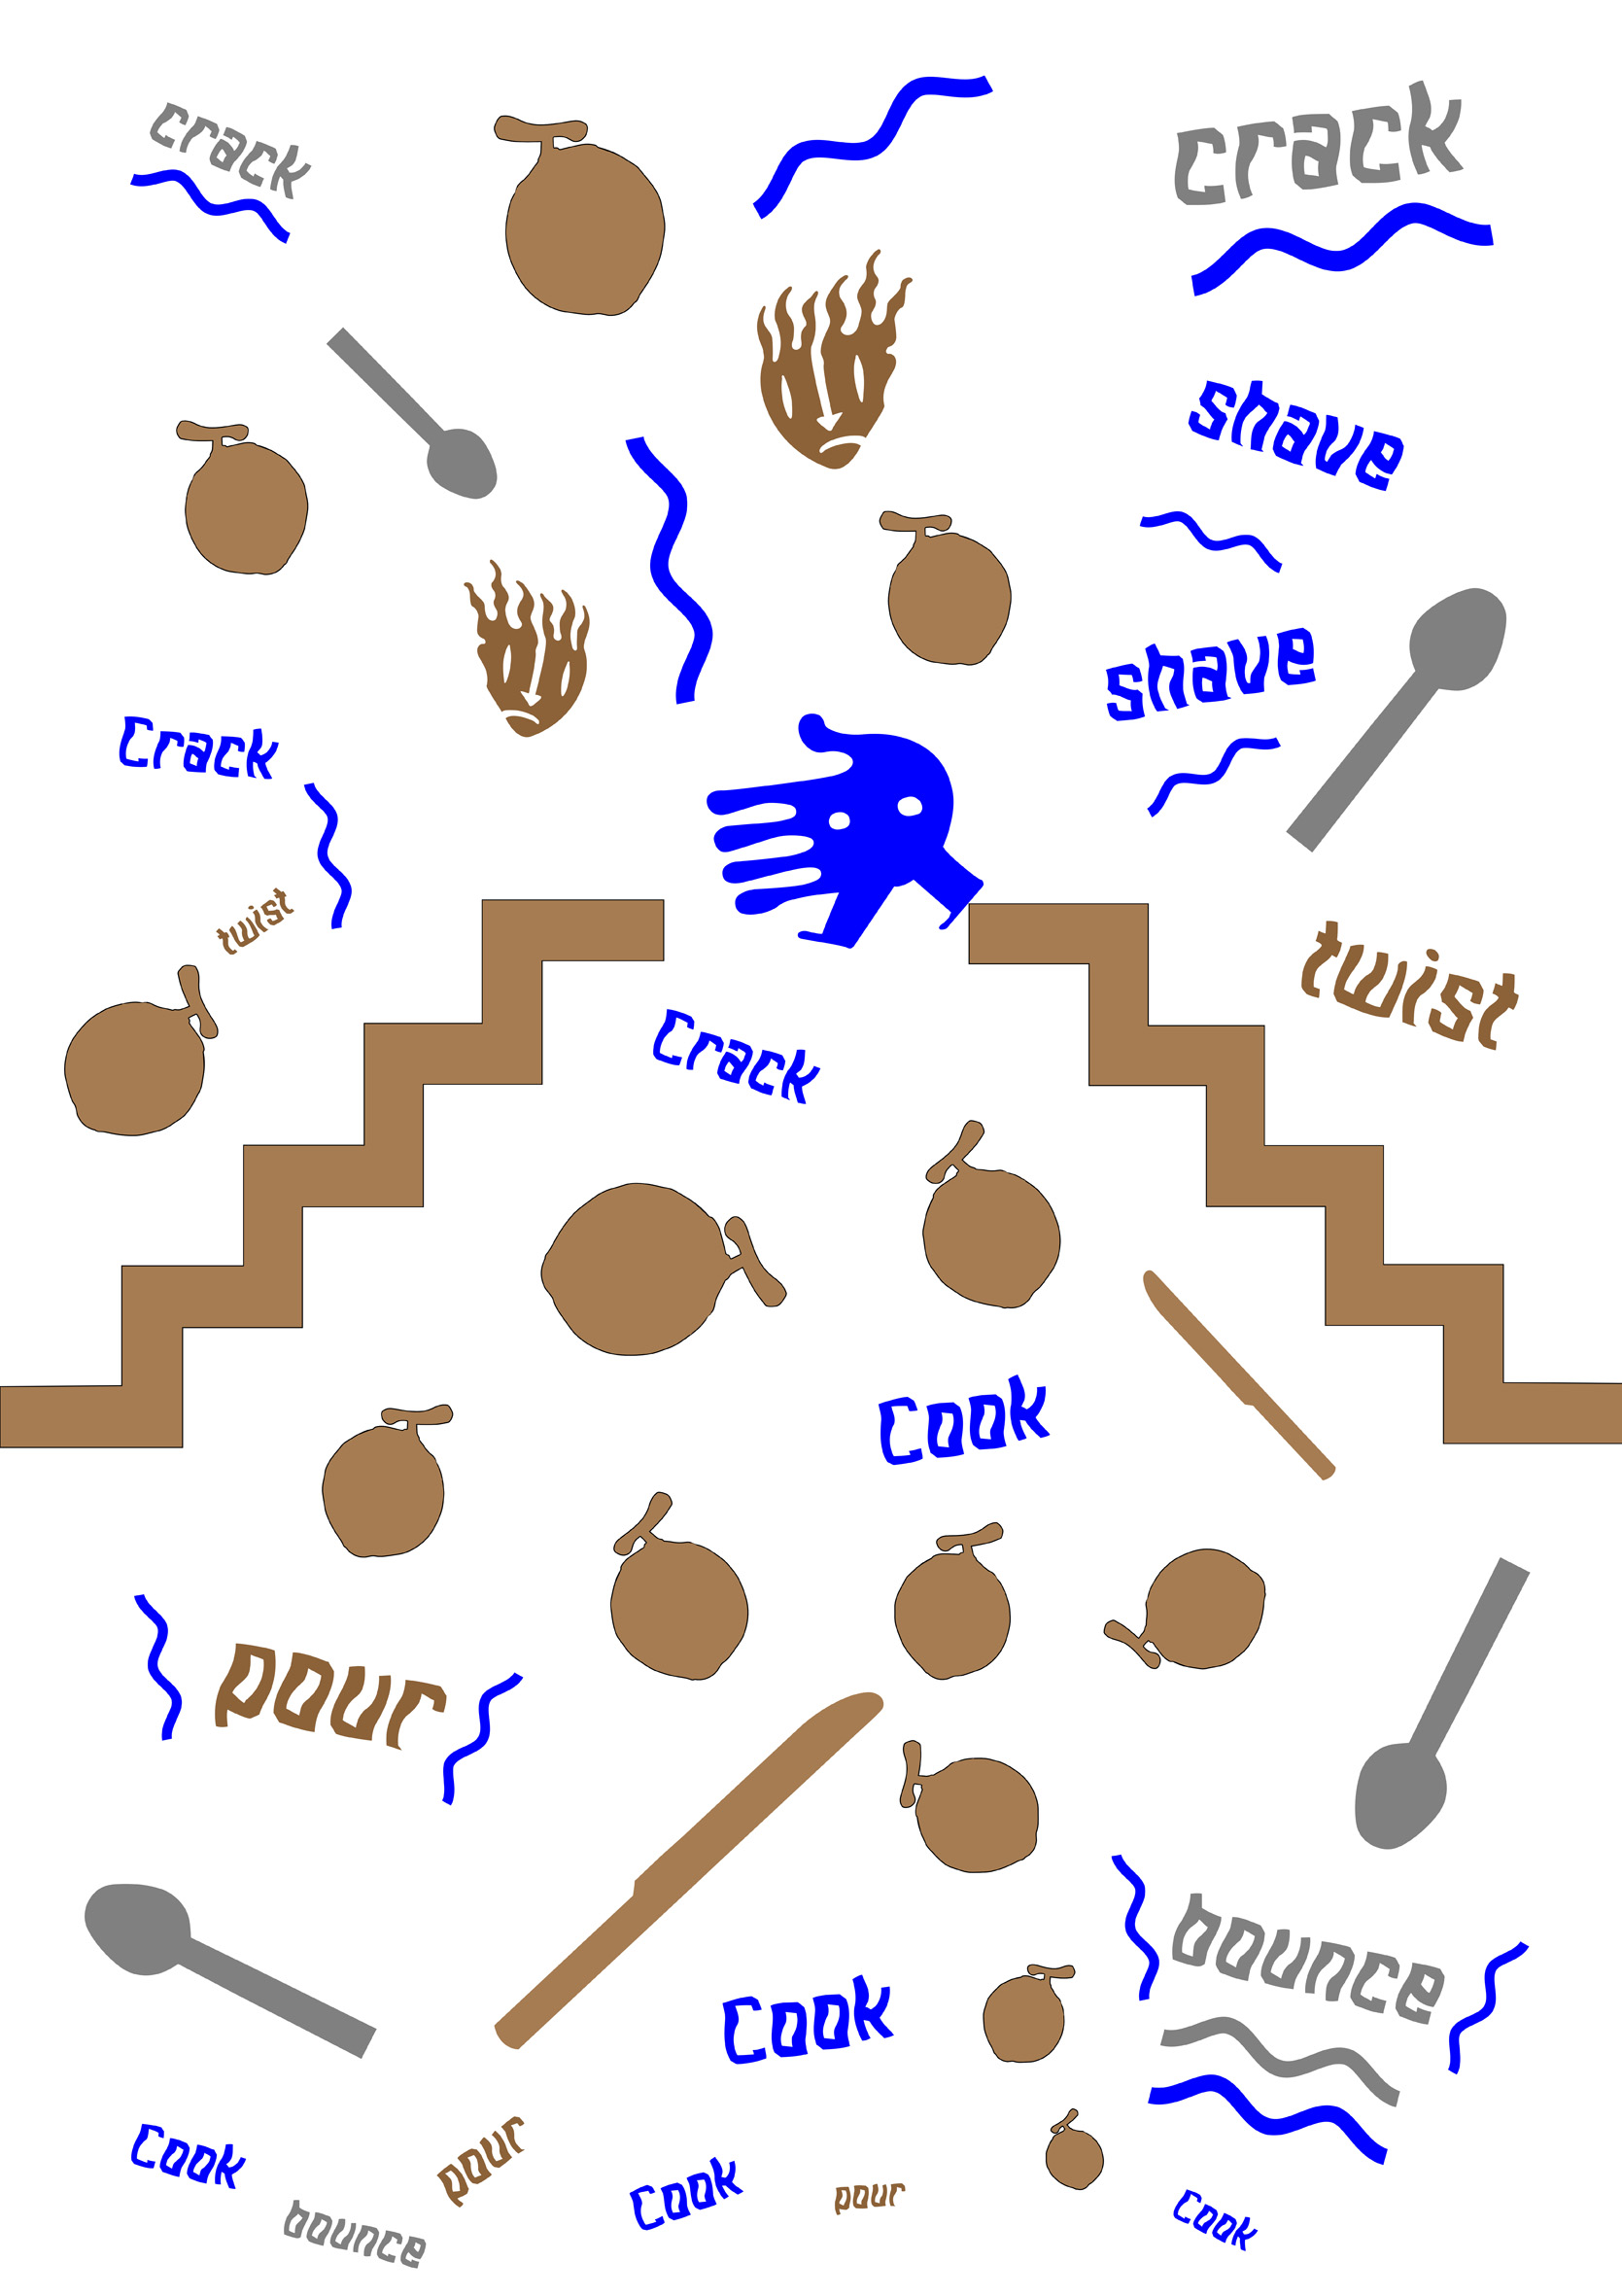   Cooking in South Auckland  (detail) 